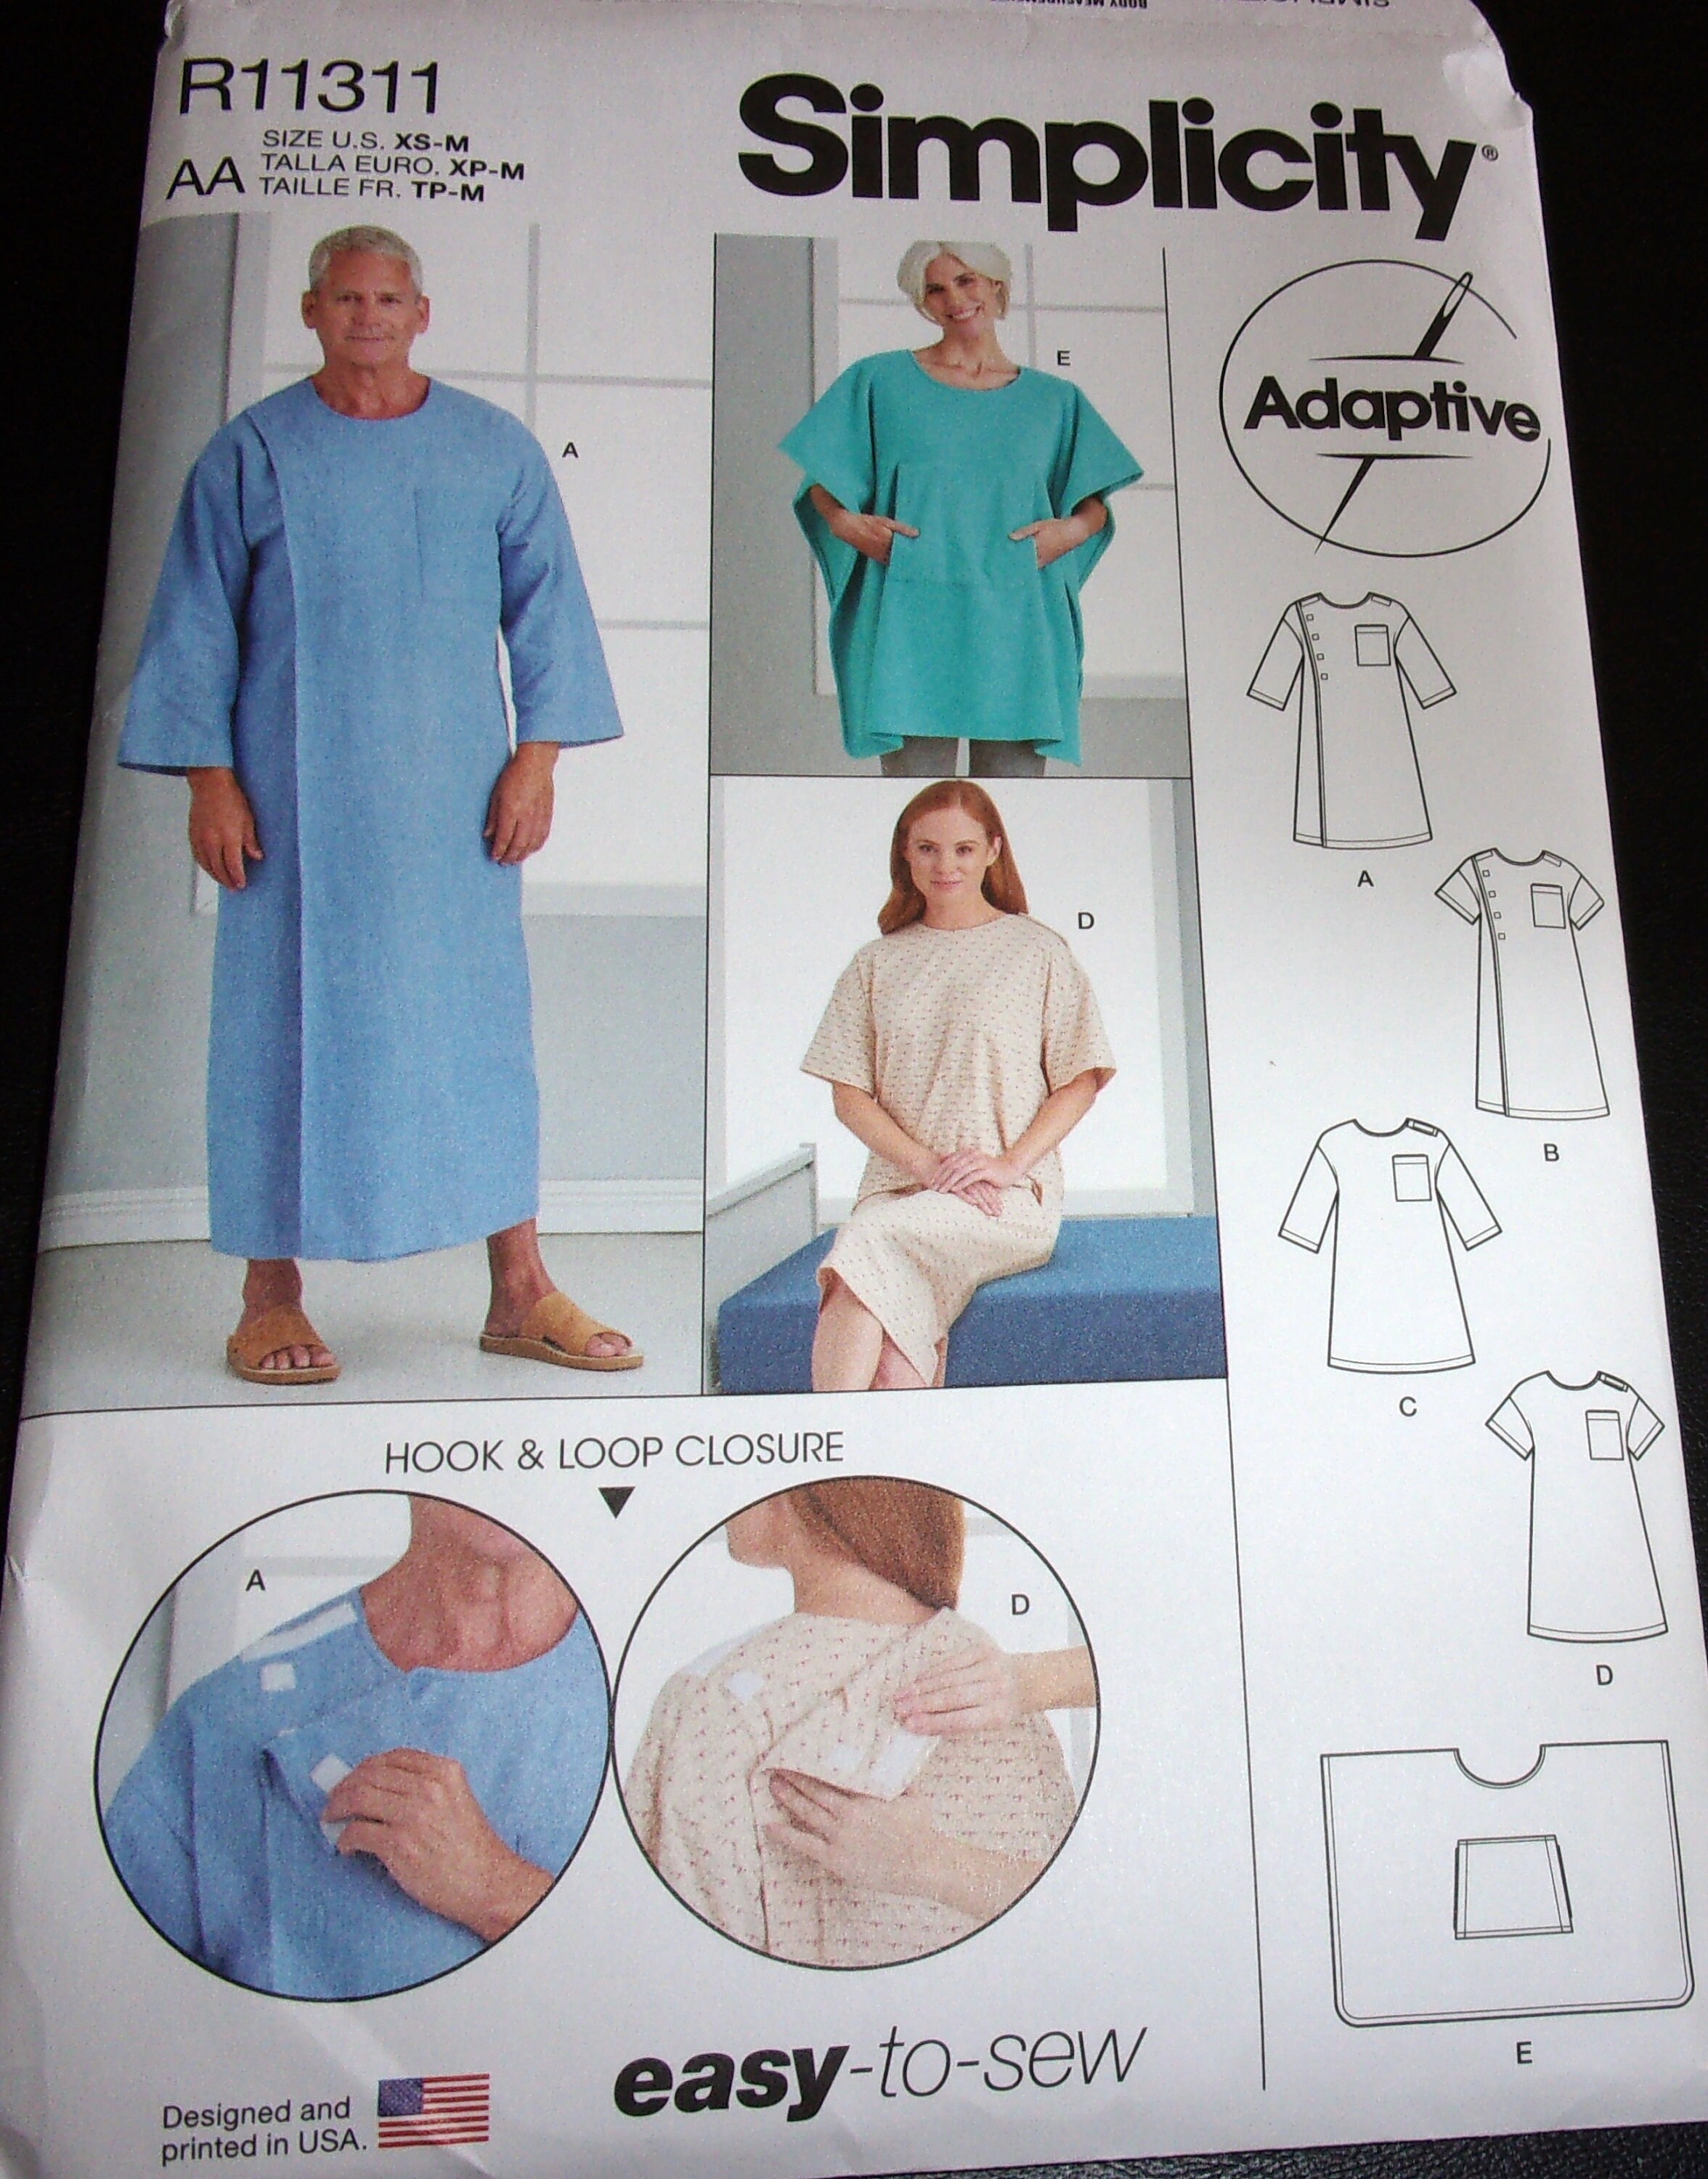 Men's Hospital Gown with Back Overlap | June Adaptive